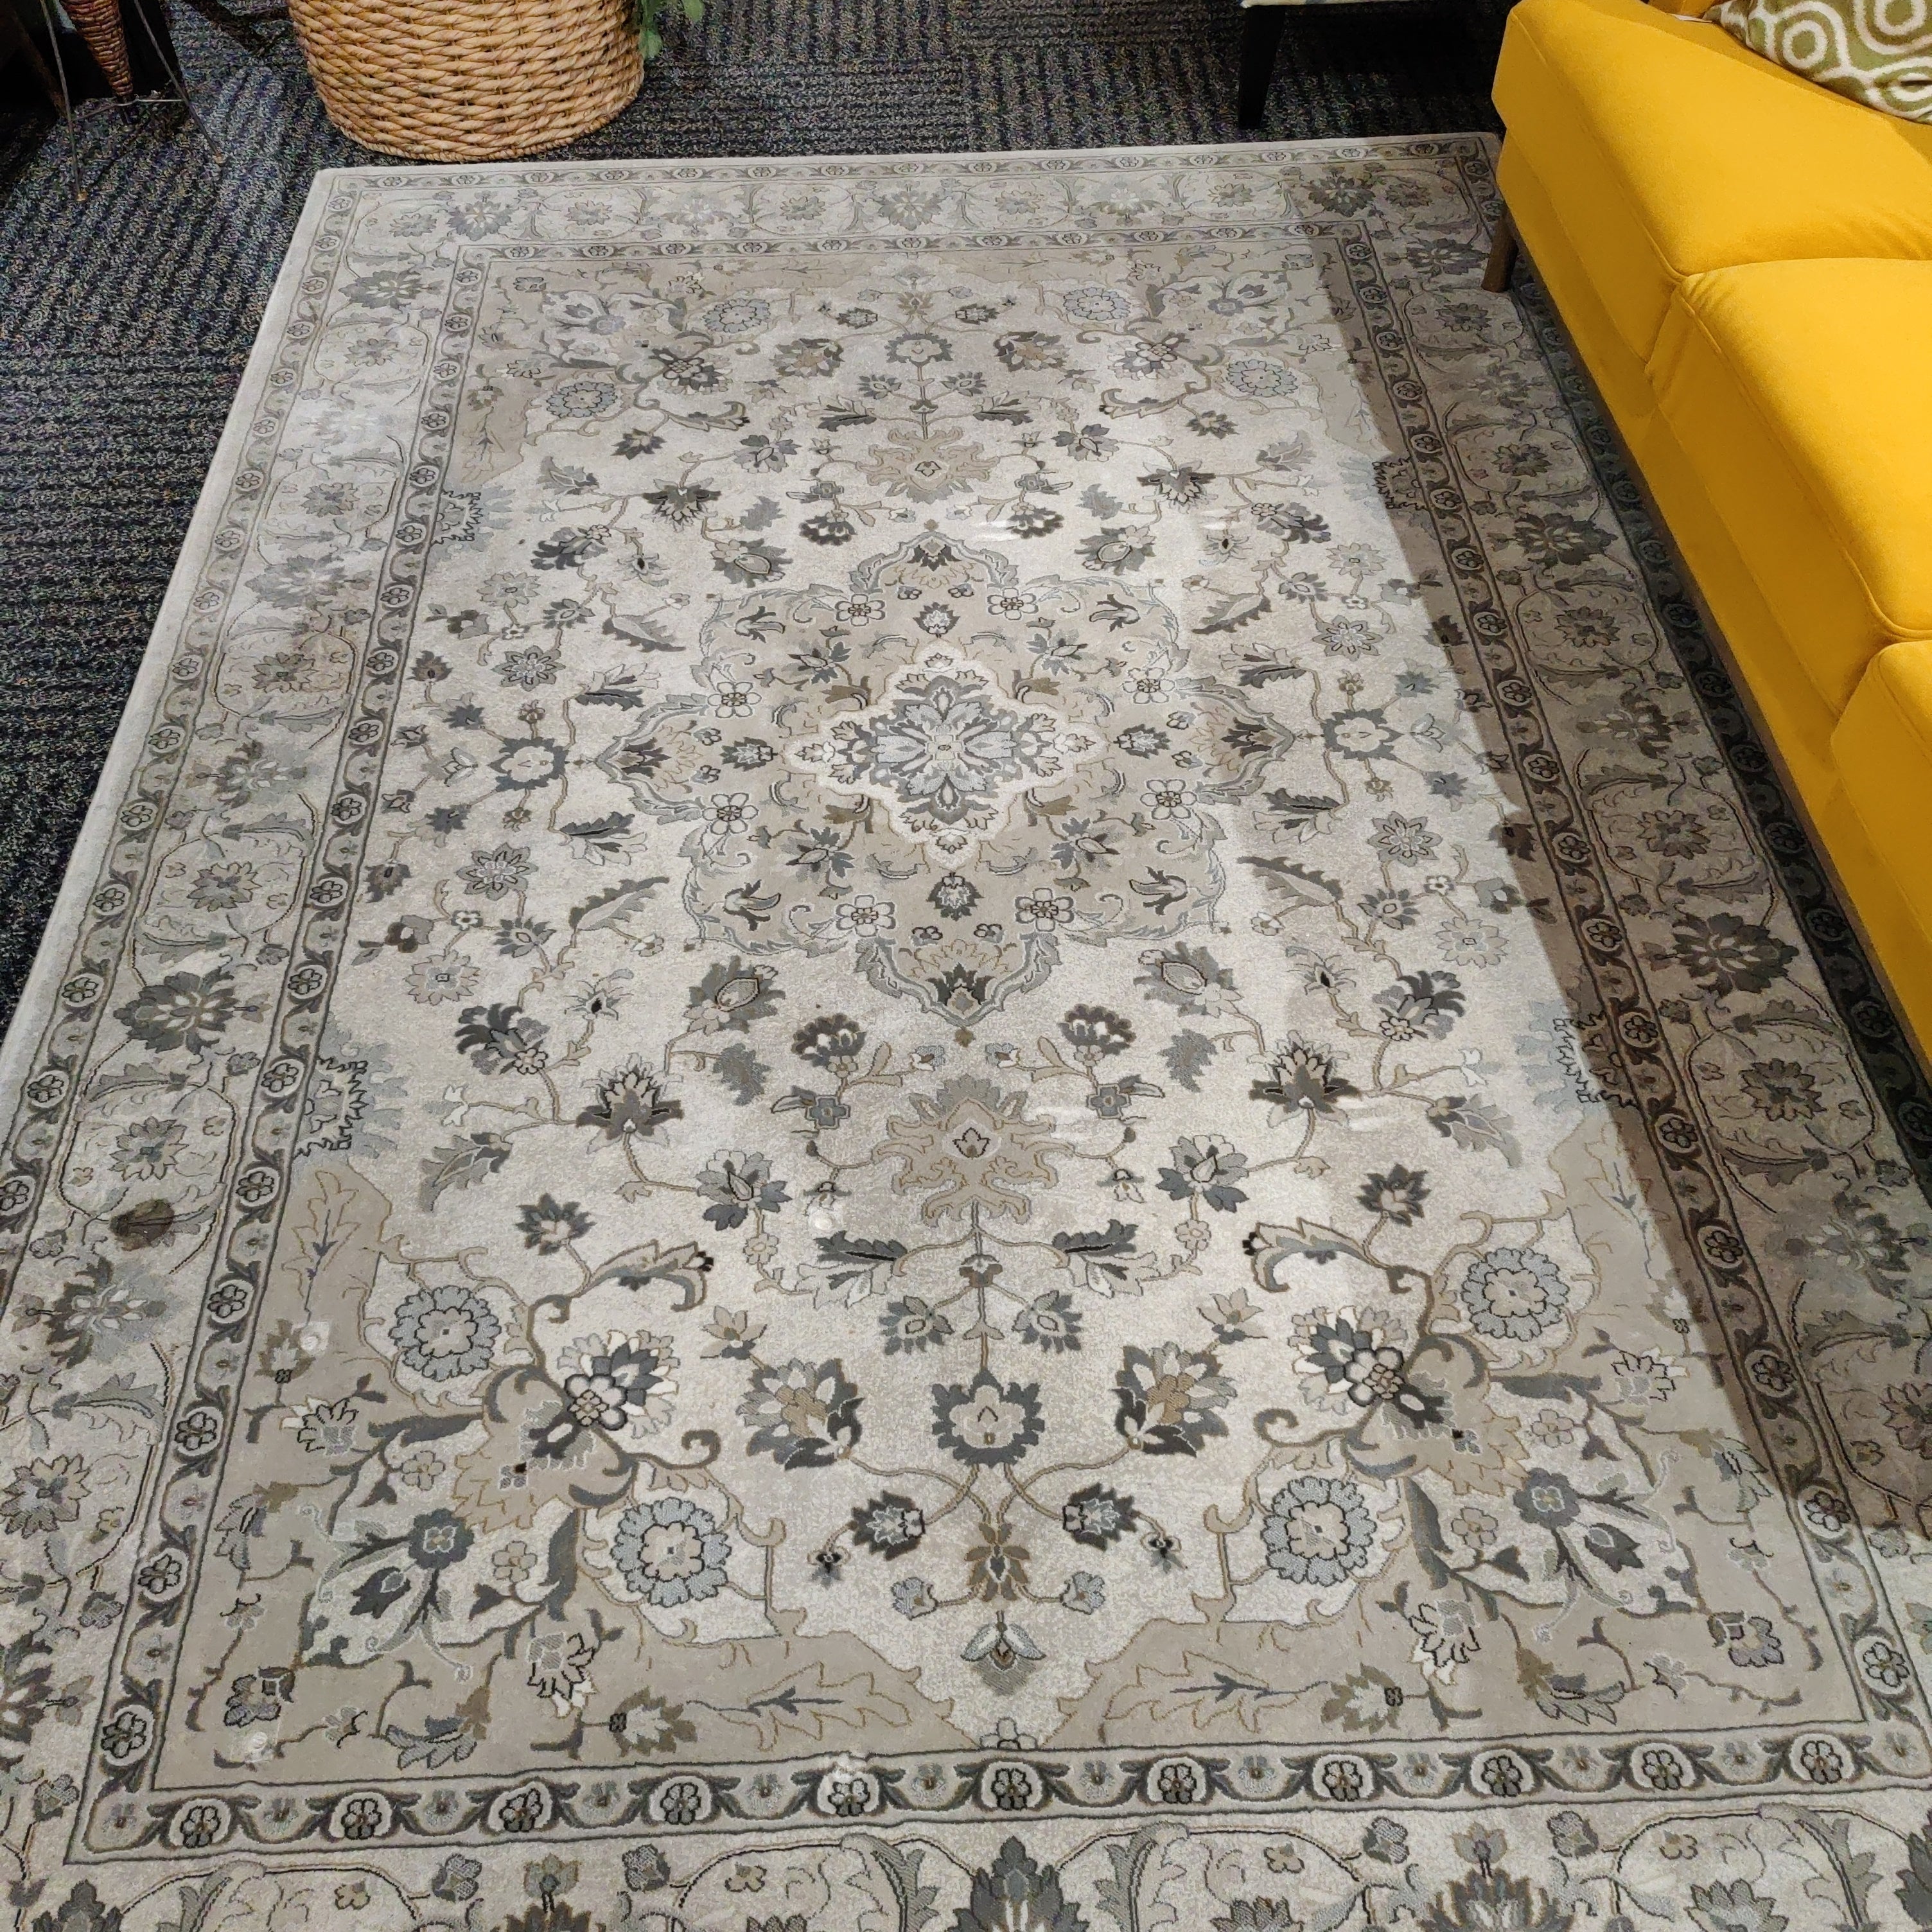 cozy modern and minimalistic patterned blue and grey/gray area rug